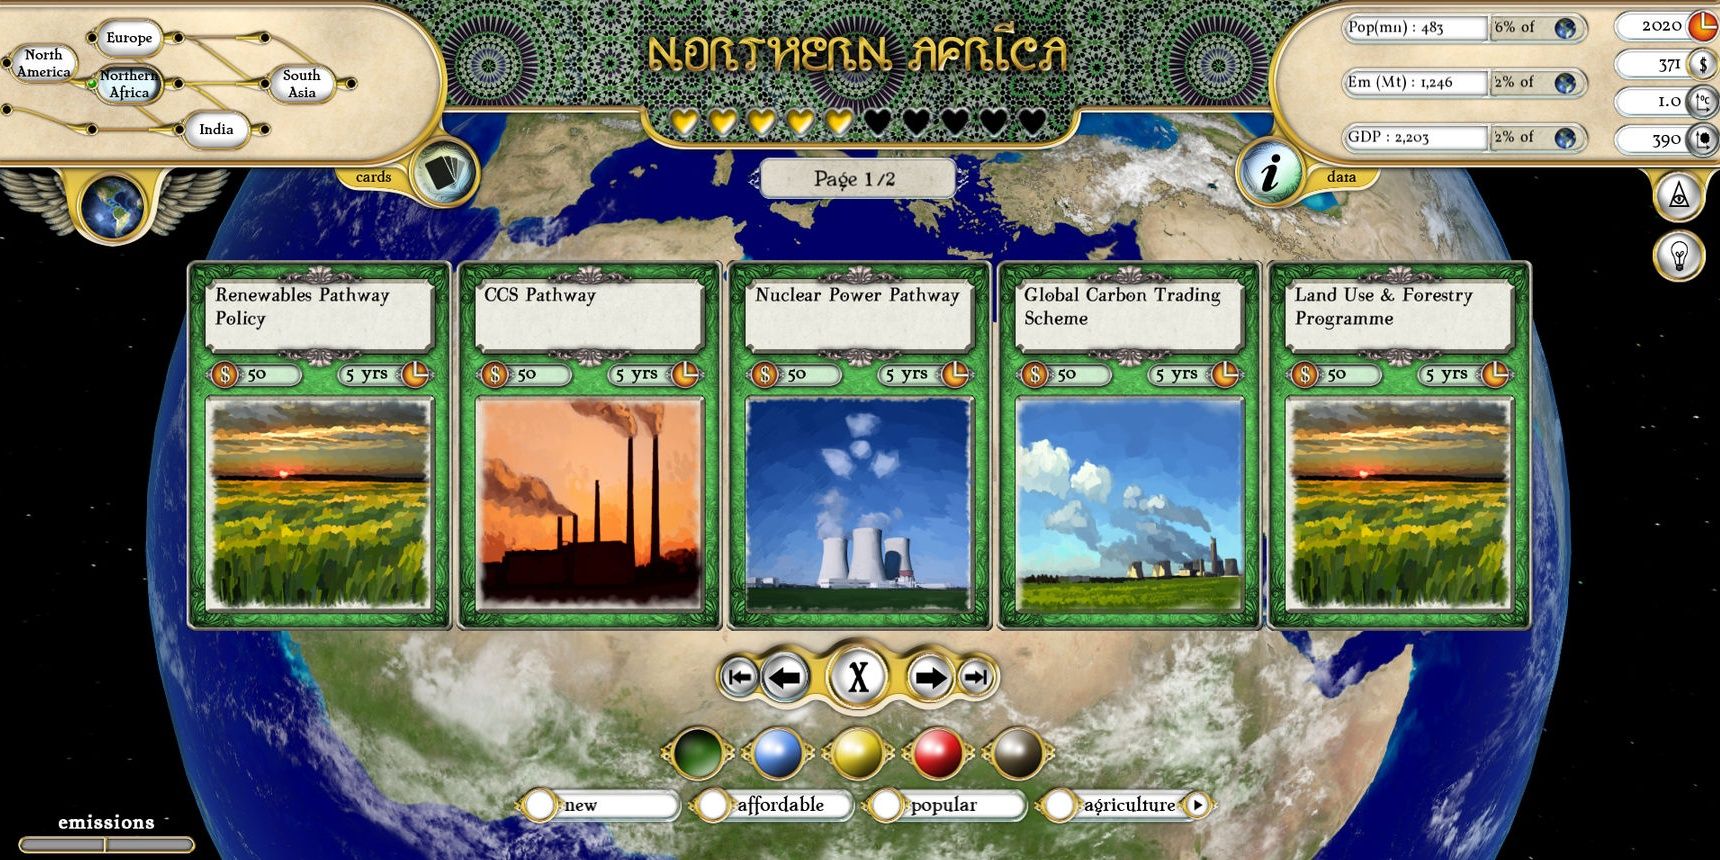 Fate of the World Screenshot showing Northern Africa and various choices